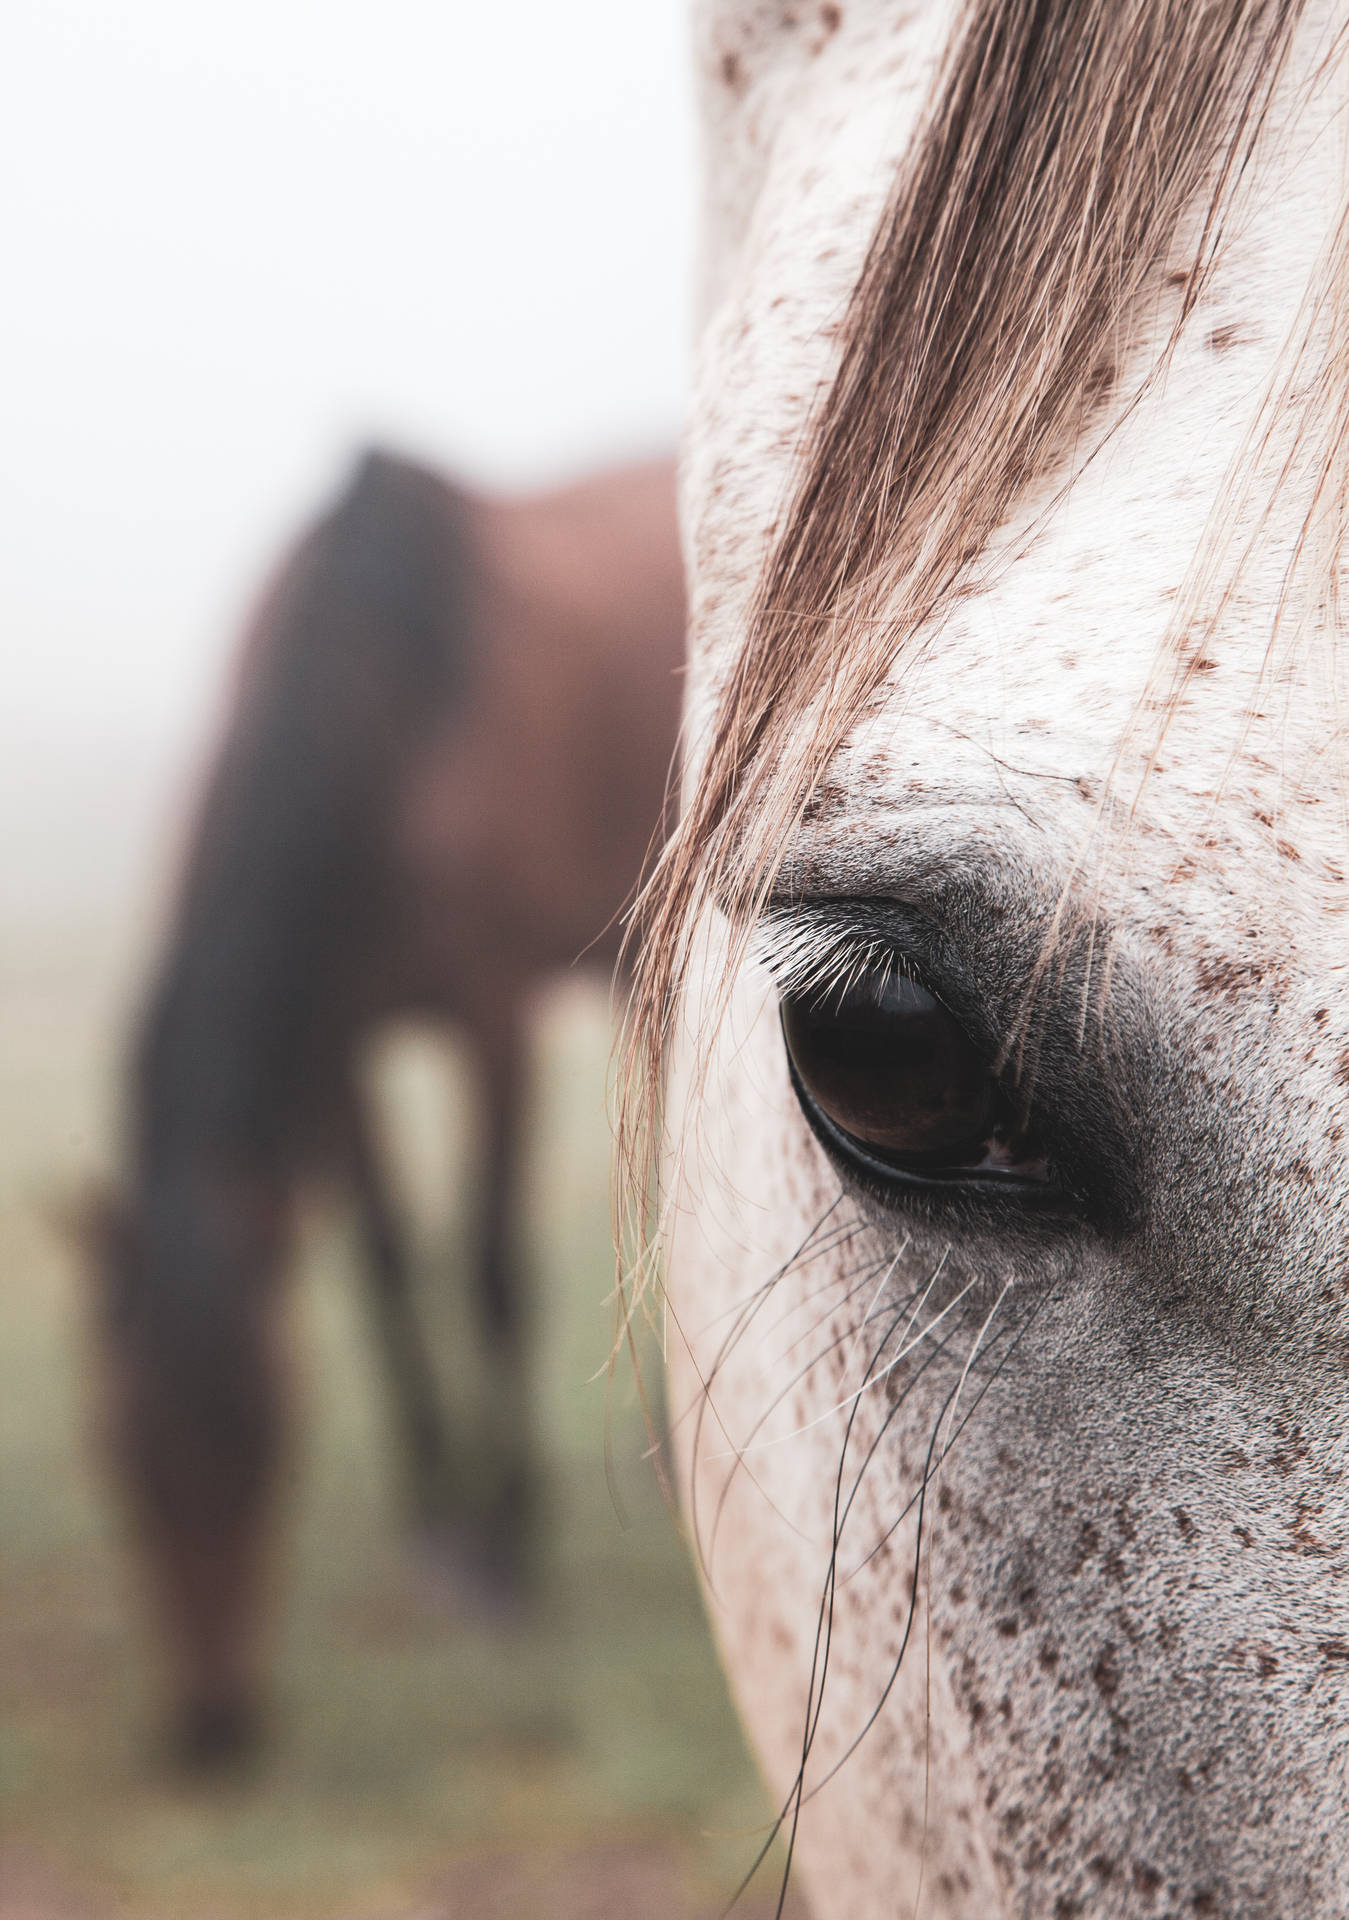 A Close Look Into the Intense, Brown Eye of an Appaloosa Horse Wallpaper